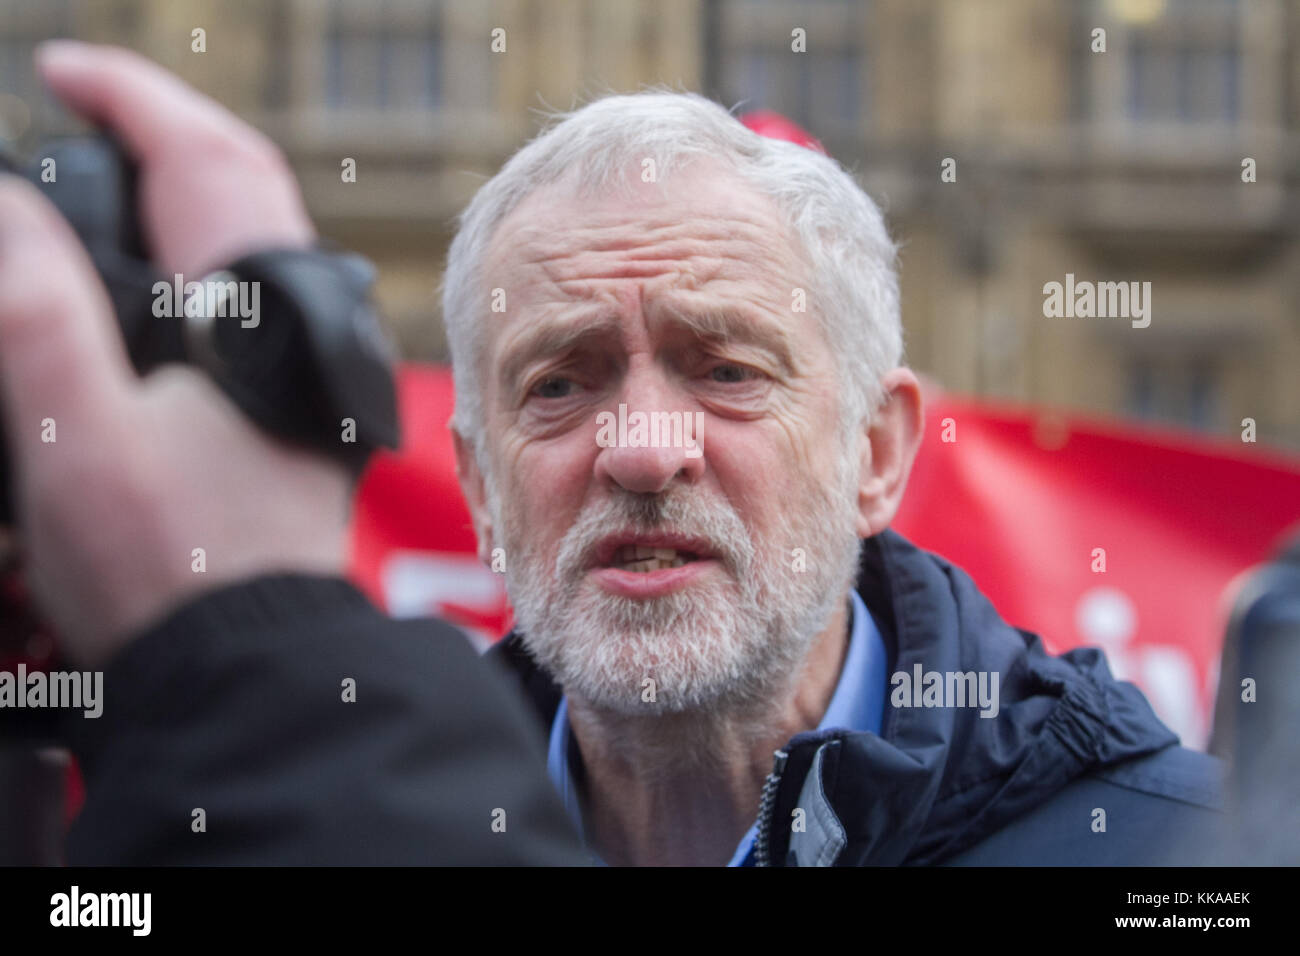 London, UK. 29th Nov, 2017. British Labour party leader Jeremy Corbyn attends a rally organized by Unite Union outside Parliament against universal credit changes introduced by the government which will replace other benefits with a single mostly payment. Universal Credit was introduced in 2013 to replace six means-tested benefits and tax credits: income based Jobseeker's Allowance, Housing Benefit, Working Tax Credit, Child Tax Credit, income based Employment and Support Allowance and Income Support Credit: amer ghazzal/Alamy Live News Stock Photo